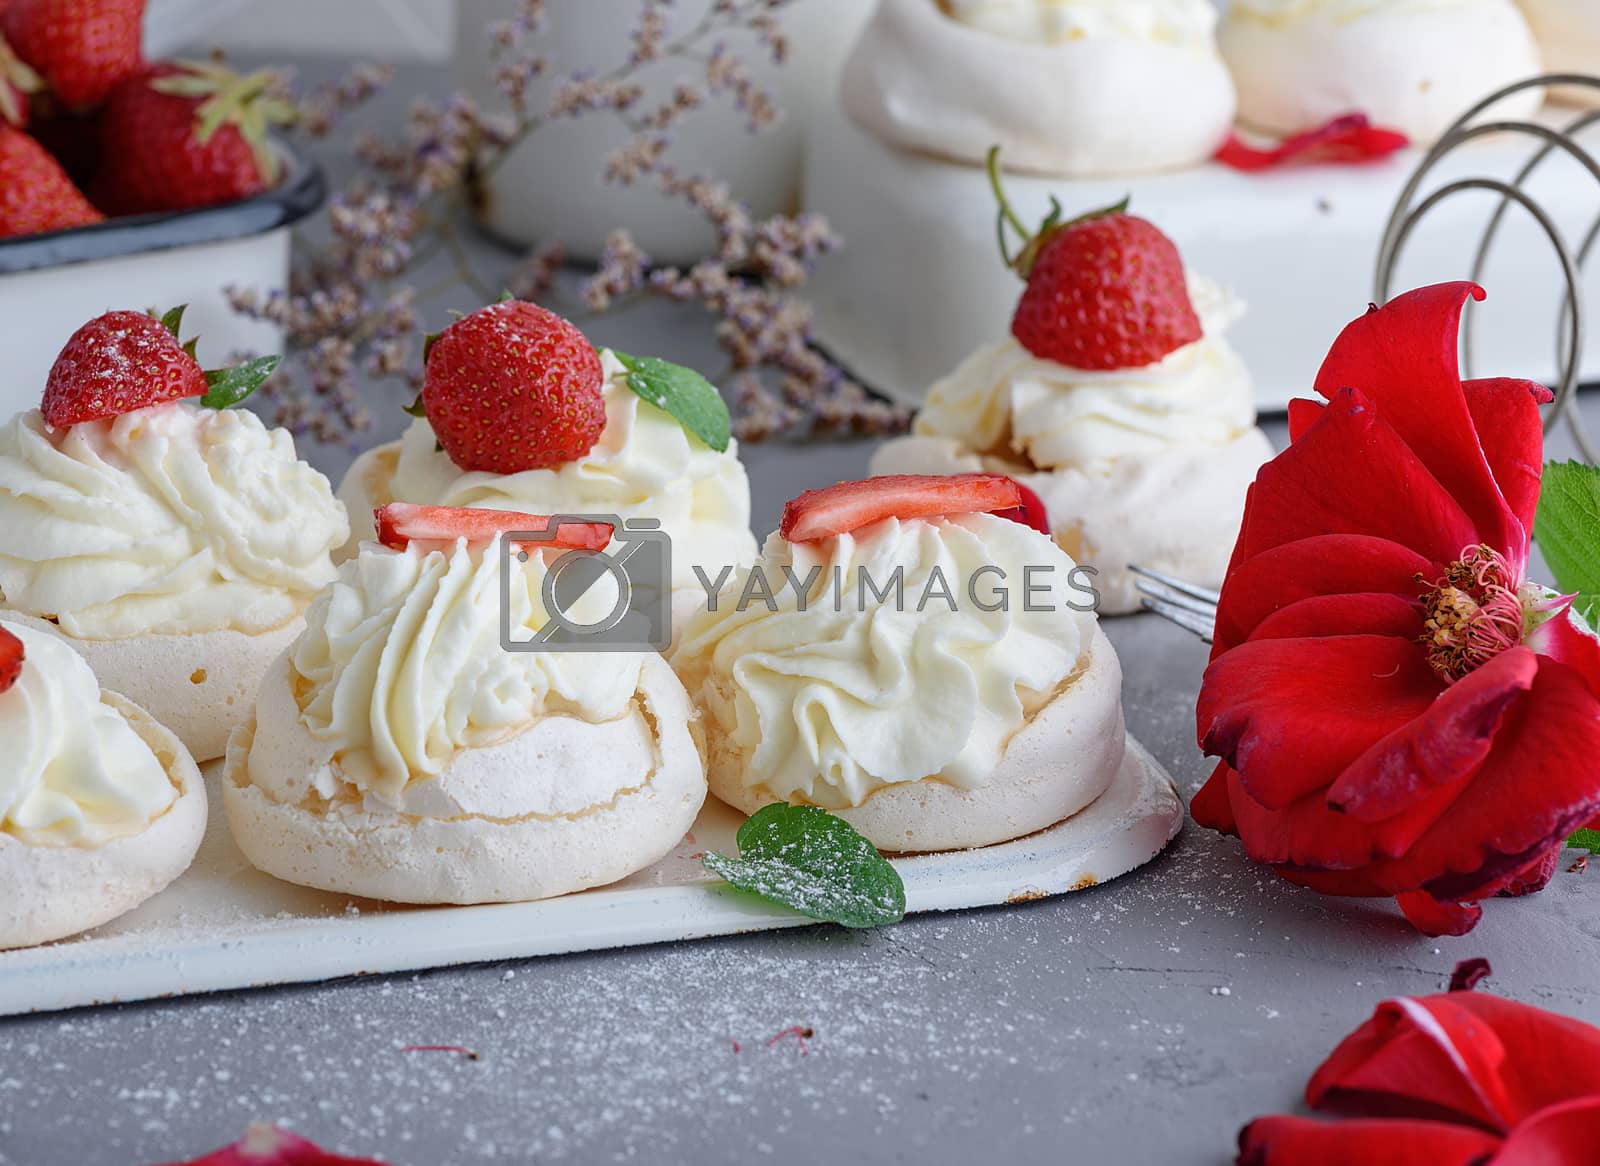 Royalty free image of baked cakes of whipped egg whites and cream by ndanko